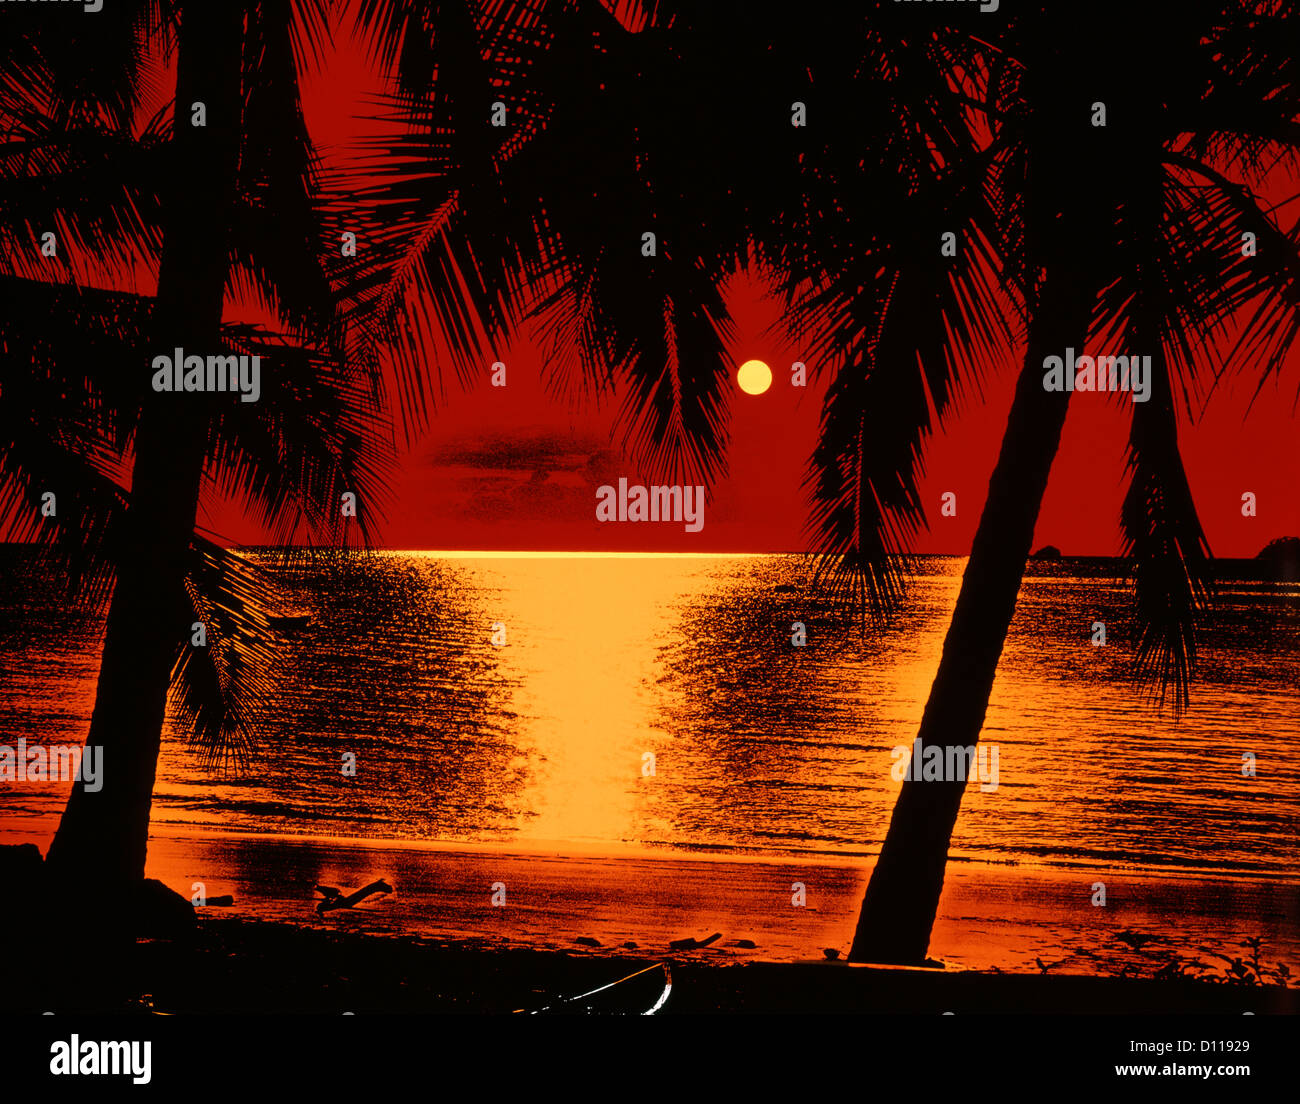 1960s 1970s RED YELLOW POSTERIZED SUNSET SILHOUETTED PALM TREES TROPICAL BEACH Stock Photo